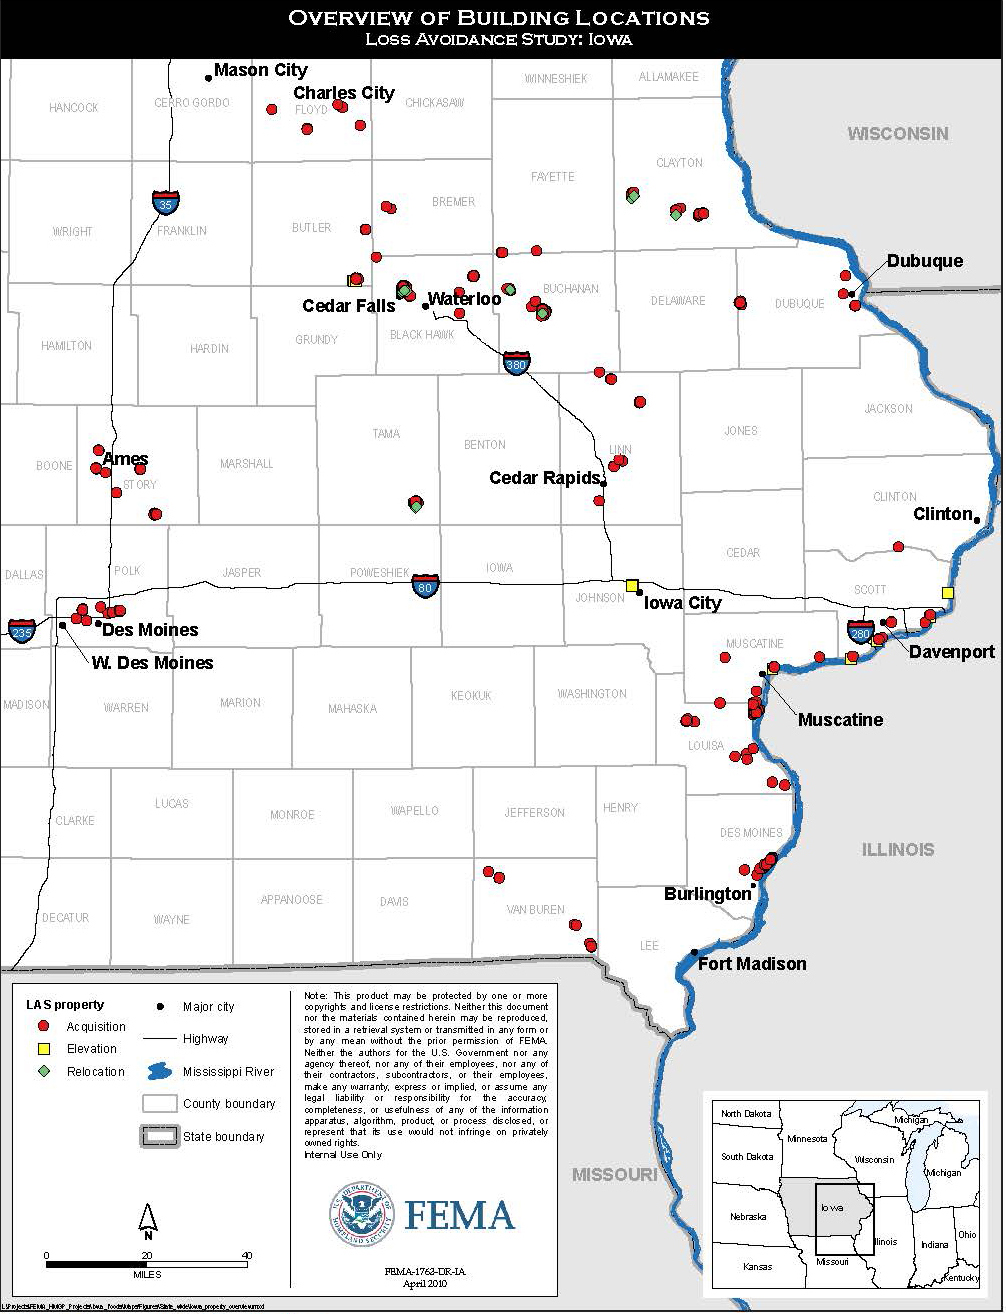 Map of Iowa showing locations of acquisitions; elevations; relocations; major cities; highways; county boundary, state boundary; Mississippi River. April 2010 map from FEMA-1763-DR-IA.